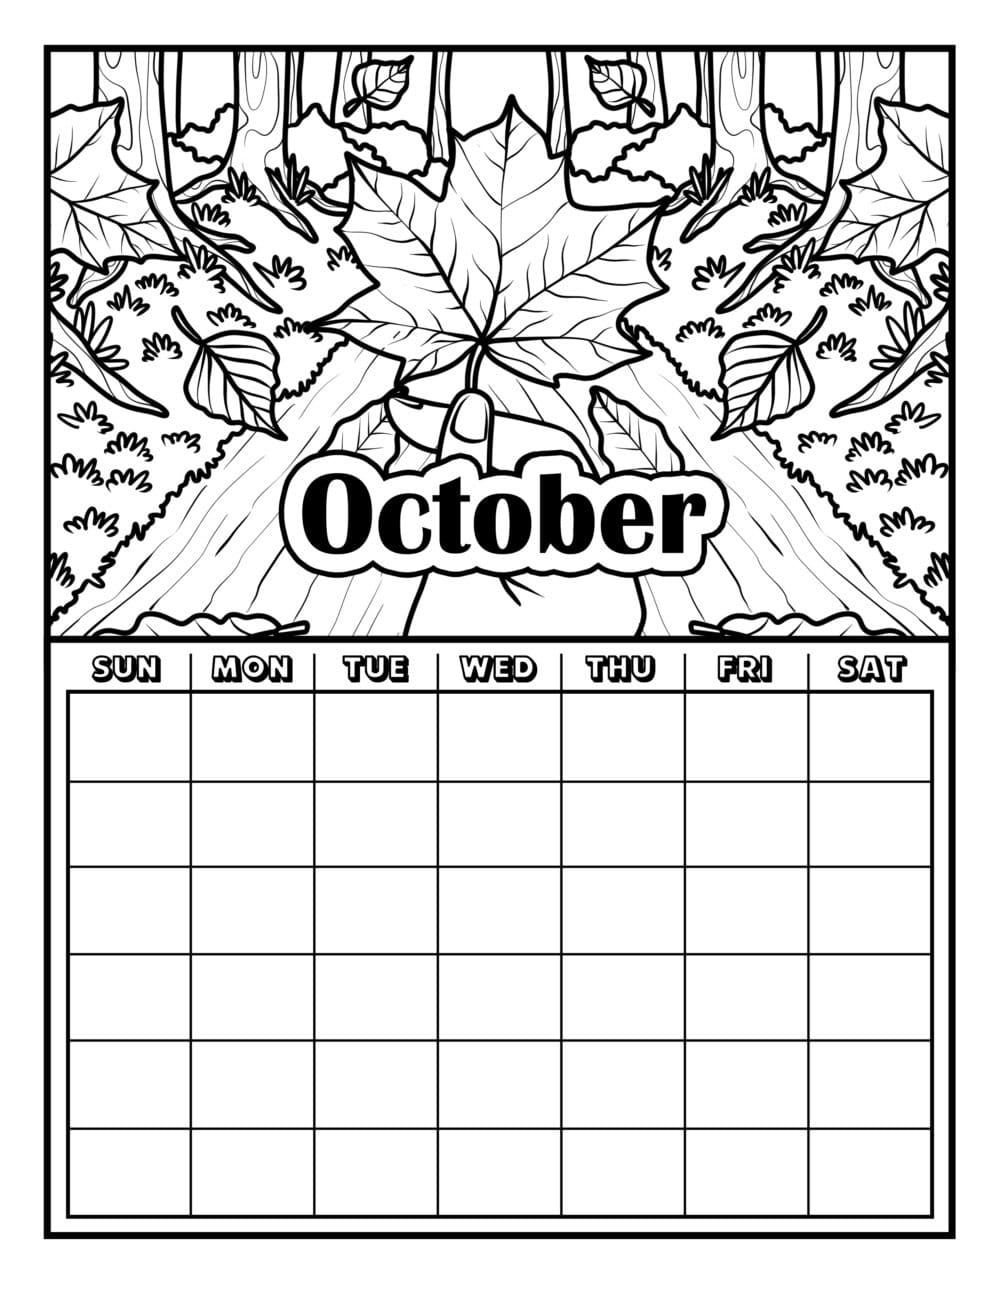 Coloring pages for october